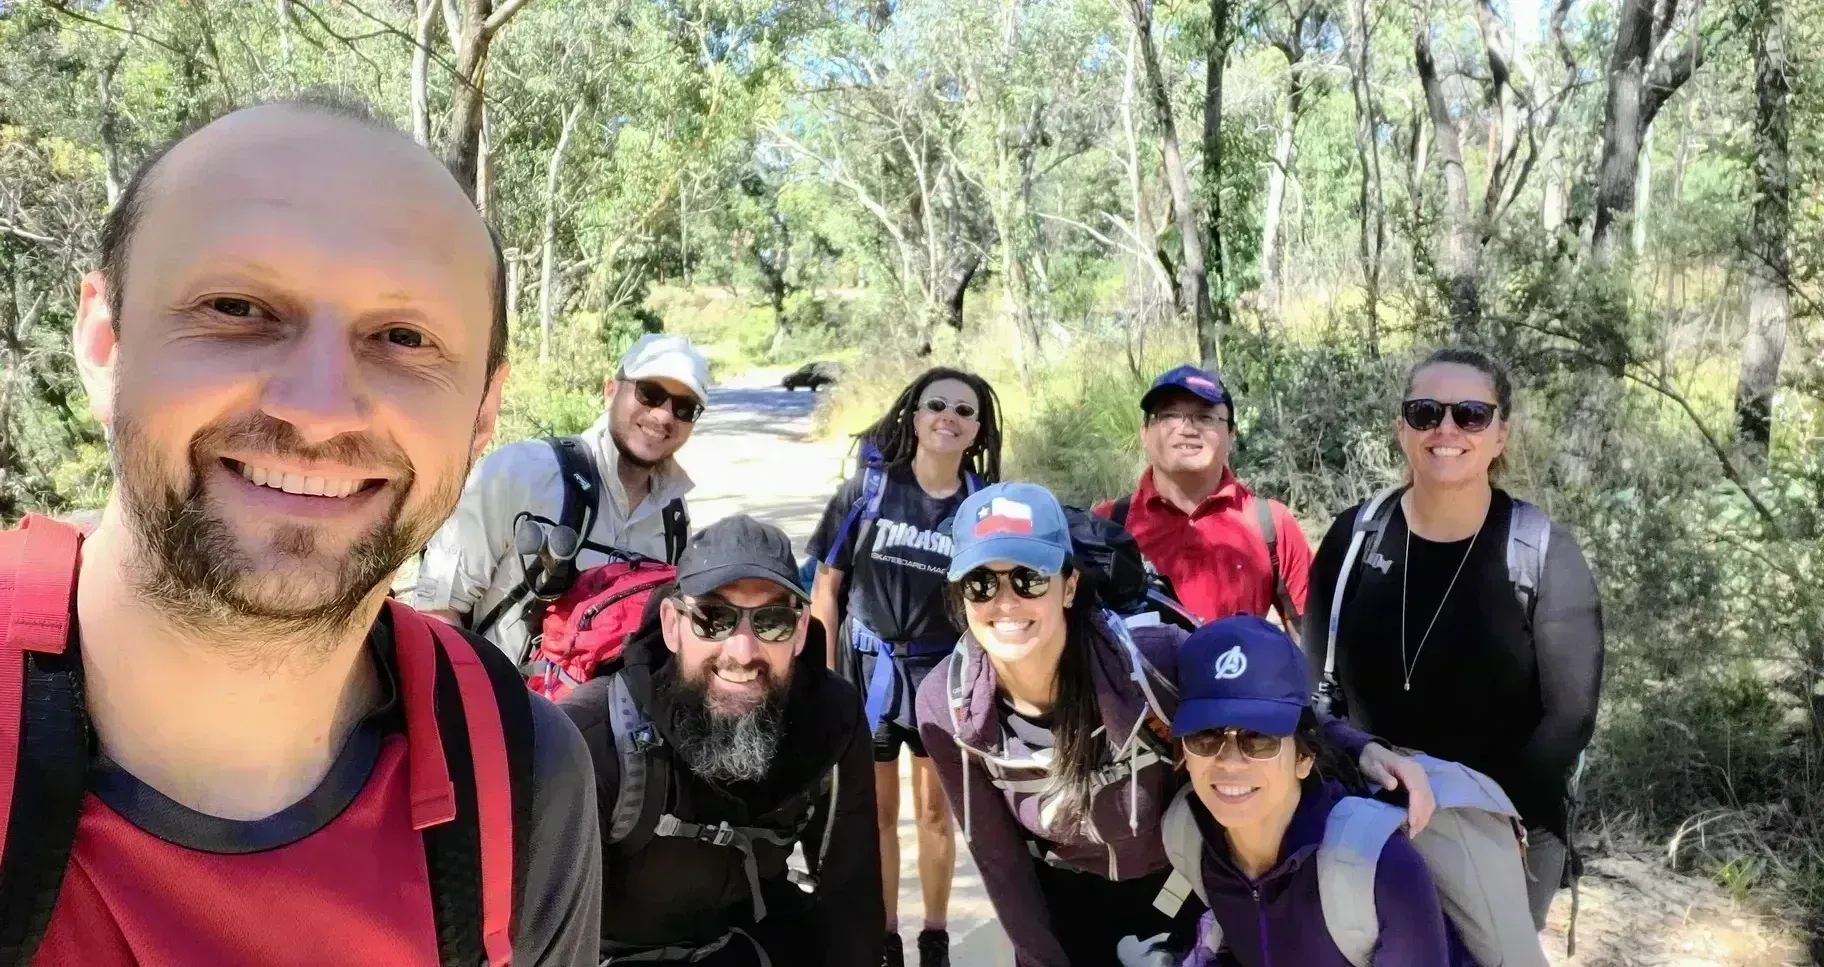 The Hiking group